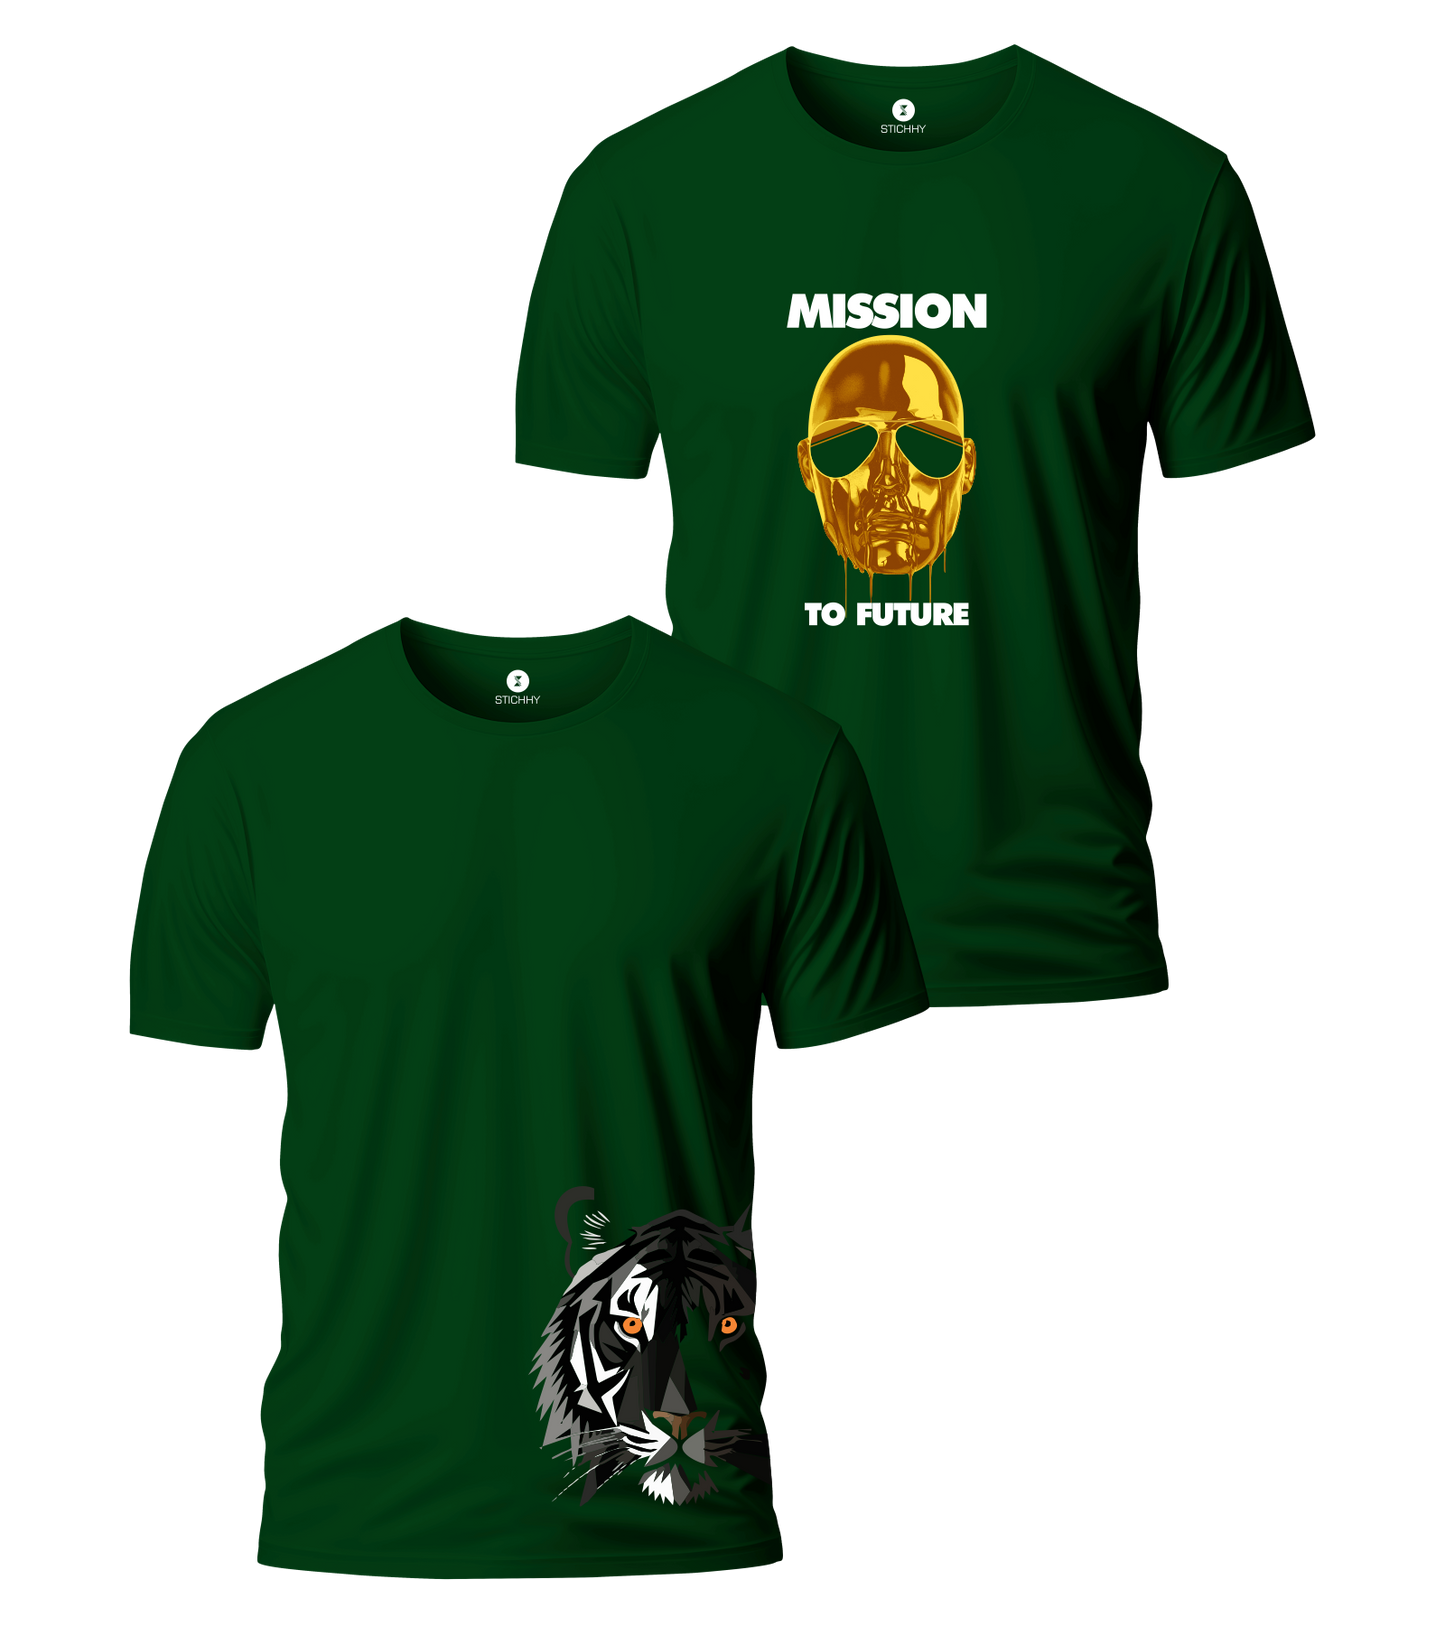 MISSION TO FUTURE & TIGER T-SHIRT BUY 1 GET 1 FREE